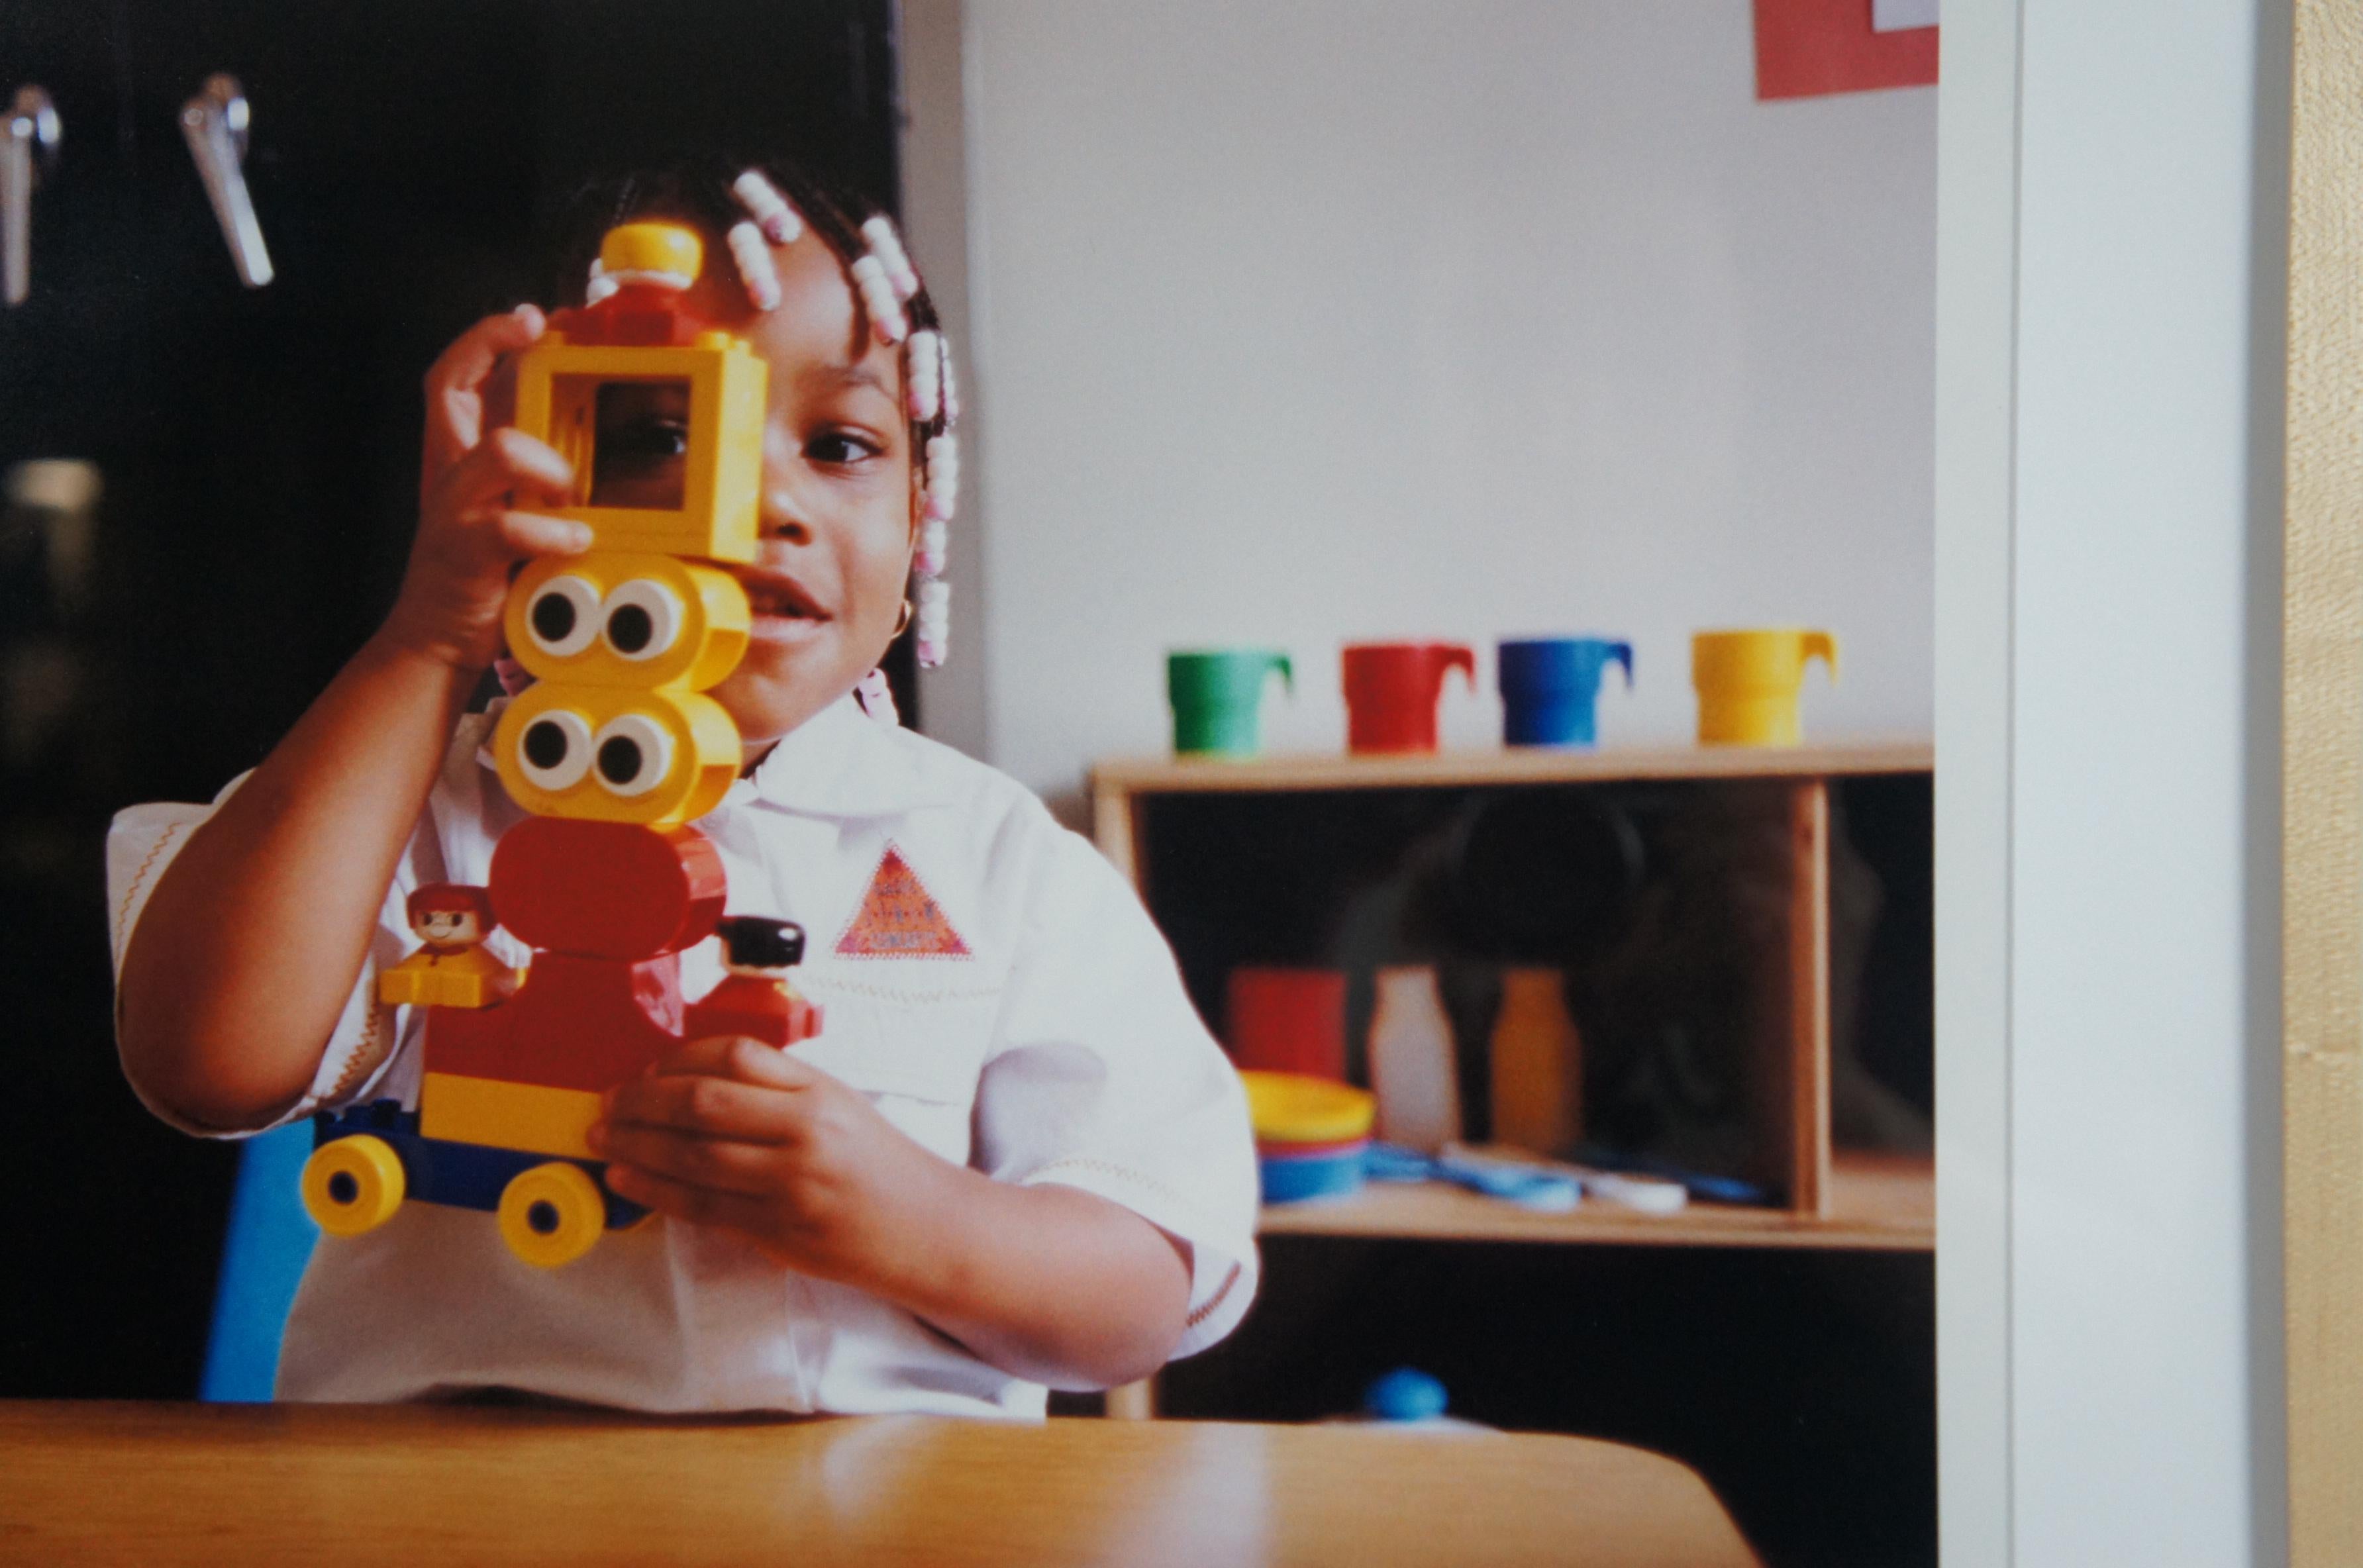 1995 Nancy Linn Early Child Photography Prints Toddlers Toys Art Exhibit 23 In Good Condition For Sale In Dayton, OH